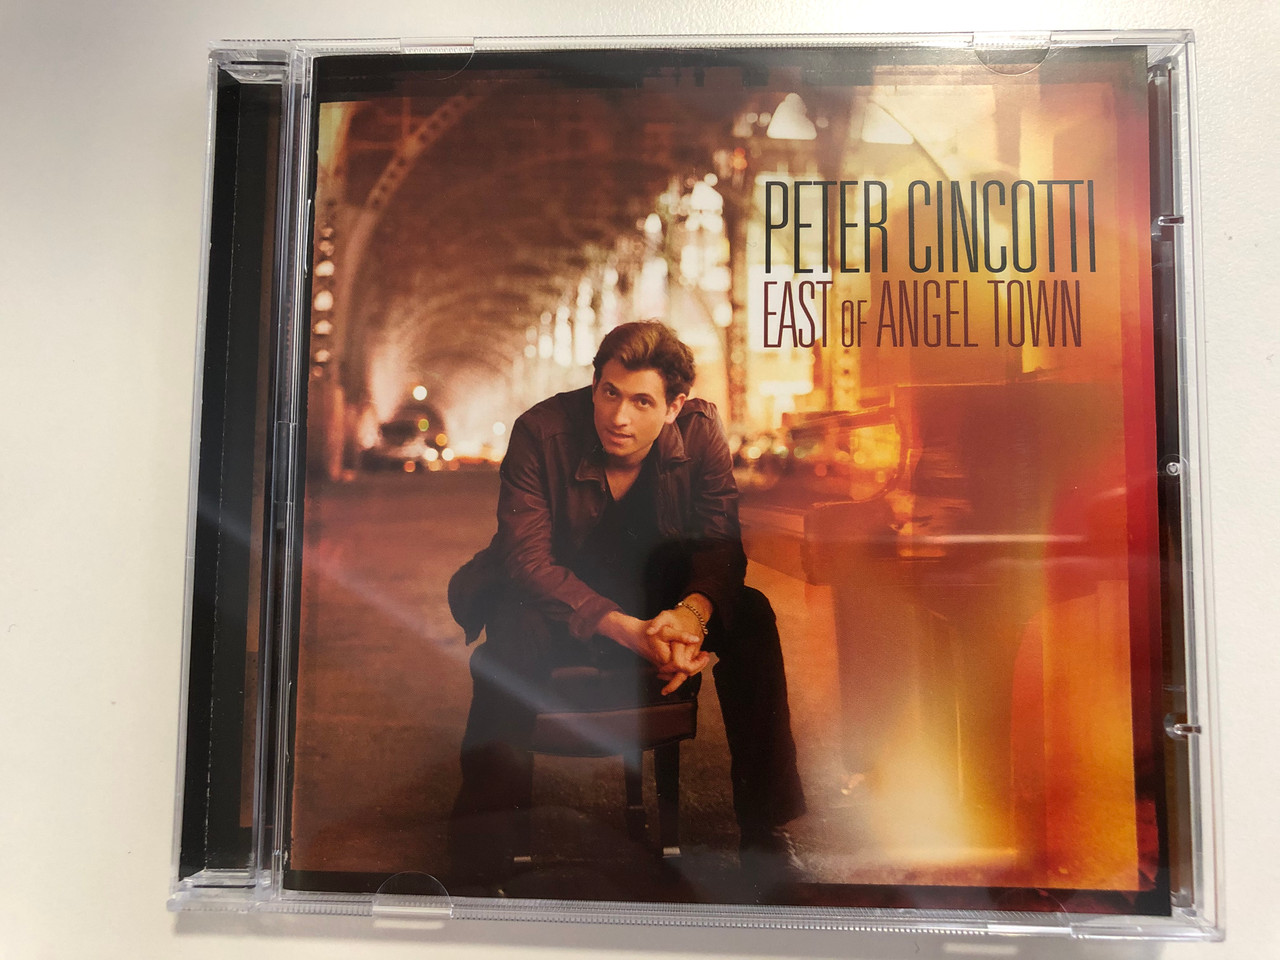 https://cdn10.bigcommerce.com/s-62bdpkt7pb/products/29859/images/177577/Peter_Cincotti_East_Of_Angel_Town_143_Records_Audio_CD_2007_9362-43286-2_1__11458.1620304300.1280.1280.JPG?c=2&_ga=2.112807108.1561355153.1620311476-427177752.1620311476